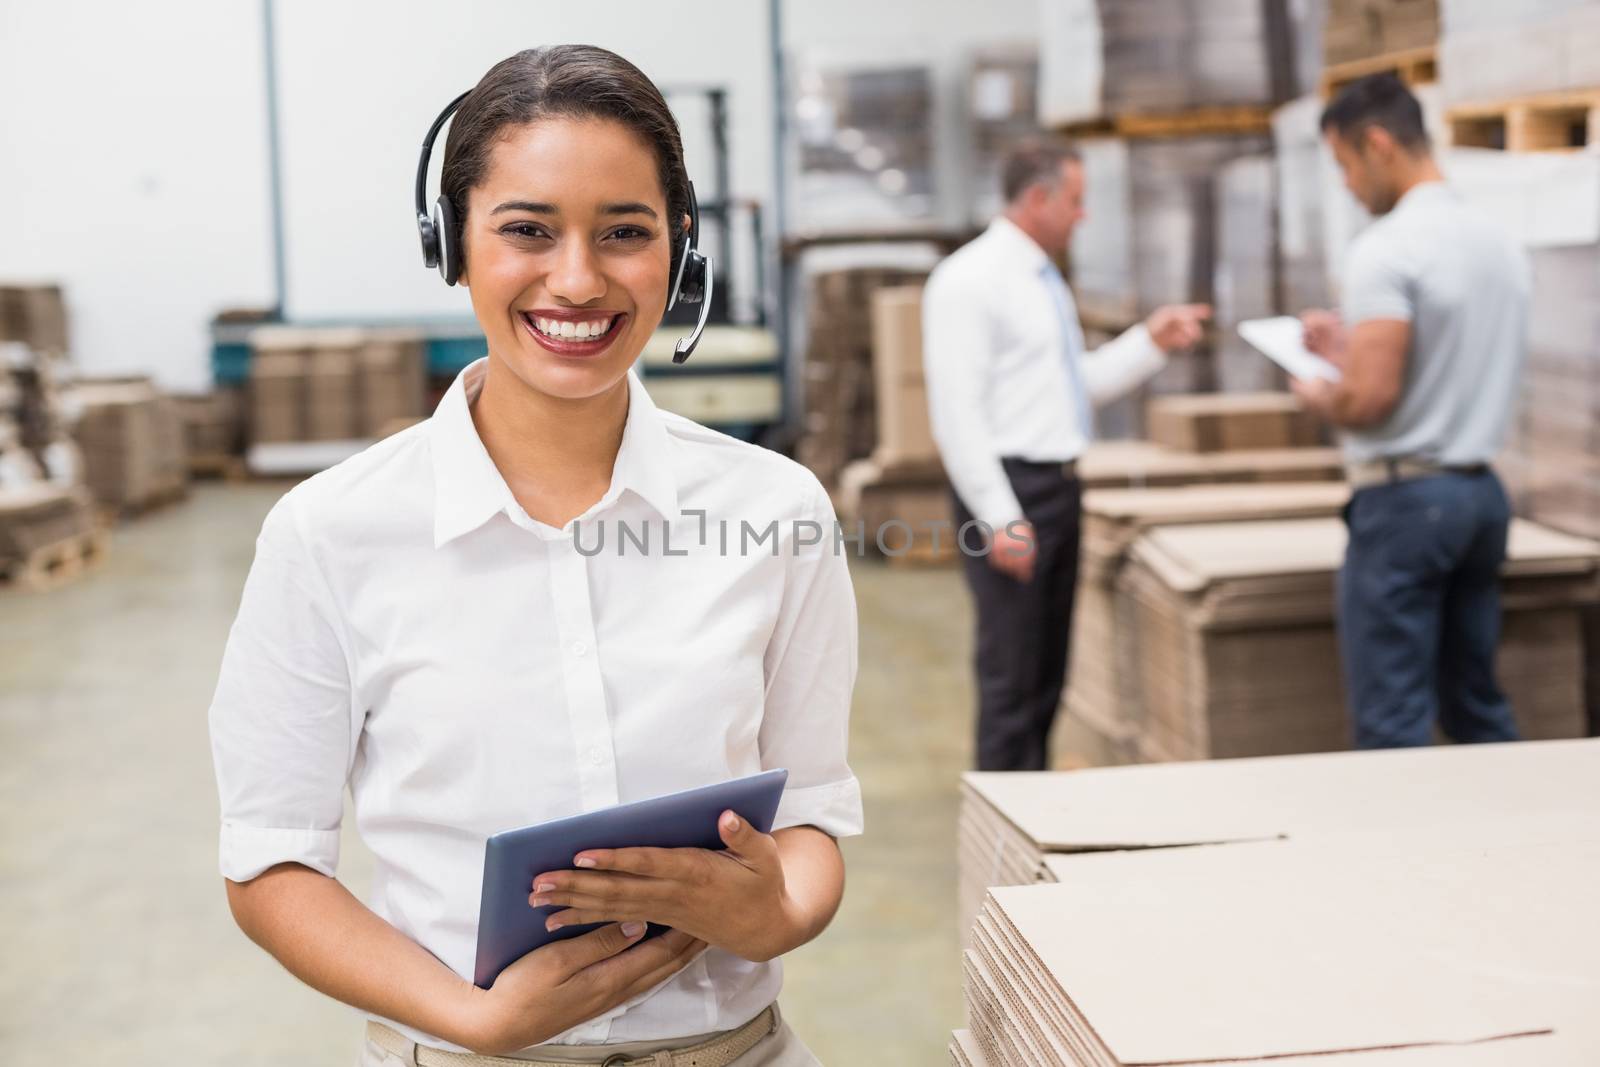 Warehouse manager wearing headset holding clipboard in a large warehouse